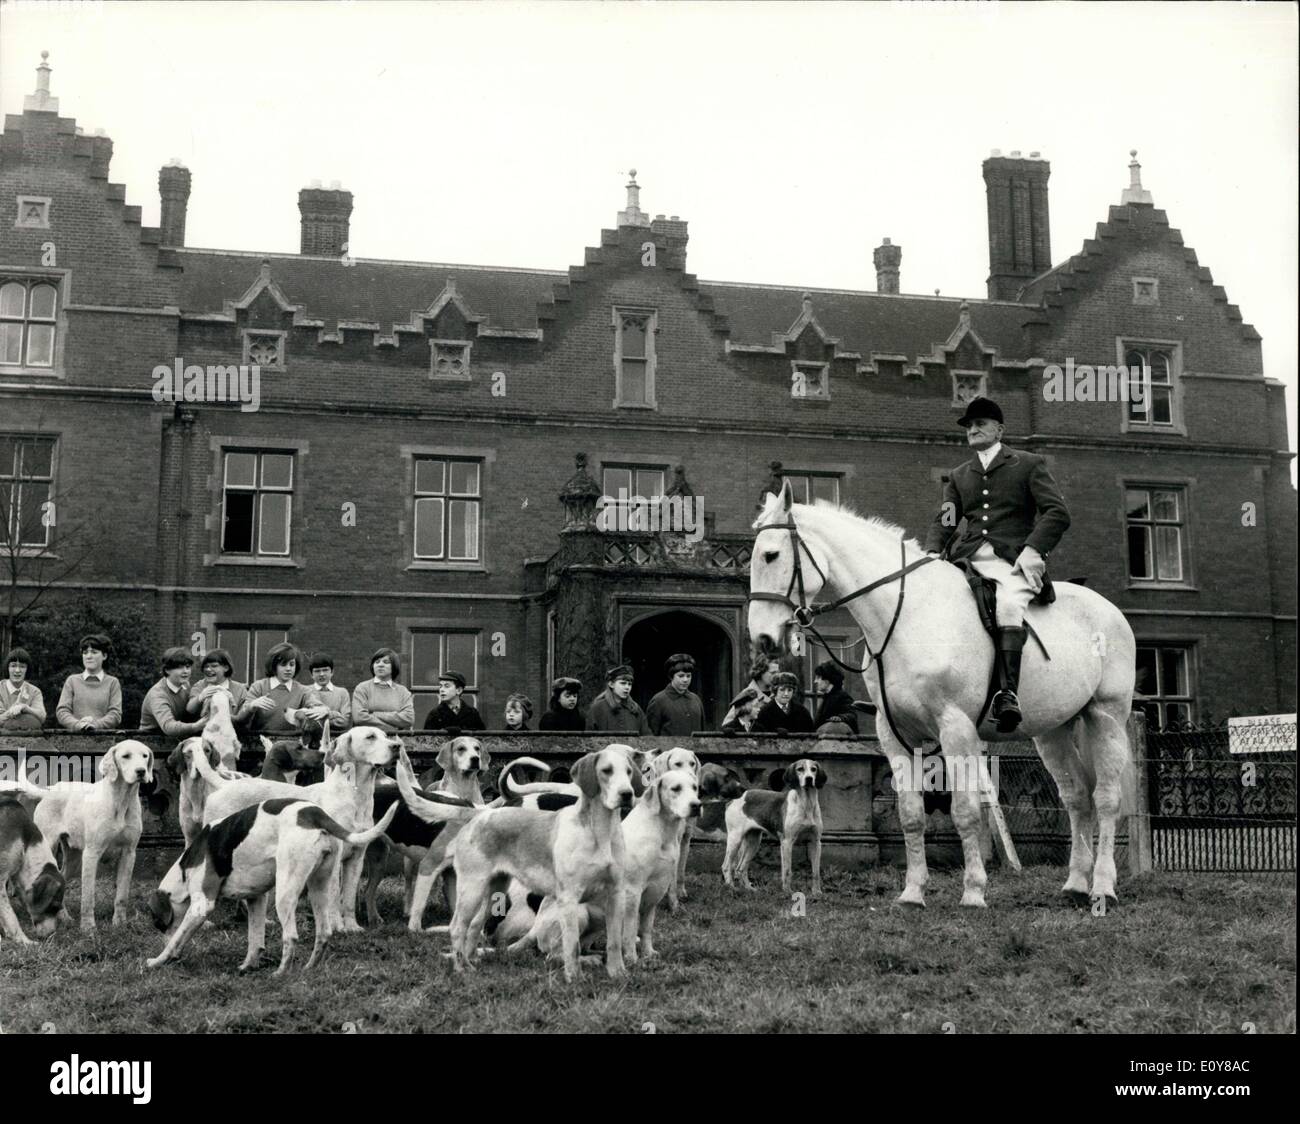 Feb. 01, 1969 - The Enfield Chace Foxhounds move off from Broxbourne School Herts ? The Enfield Chace Foxhounds meet this morning at the Broxbourne School for Girls in Broxbourne, Herts, giving the pupils a grand opportunity to see the colourful turn-out of the hunt meet. Photo Shows: A general view of the hunt before it moved off this morning with the Broxbourne School in the background, and a line of girls from the school looking on. Stock Photo